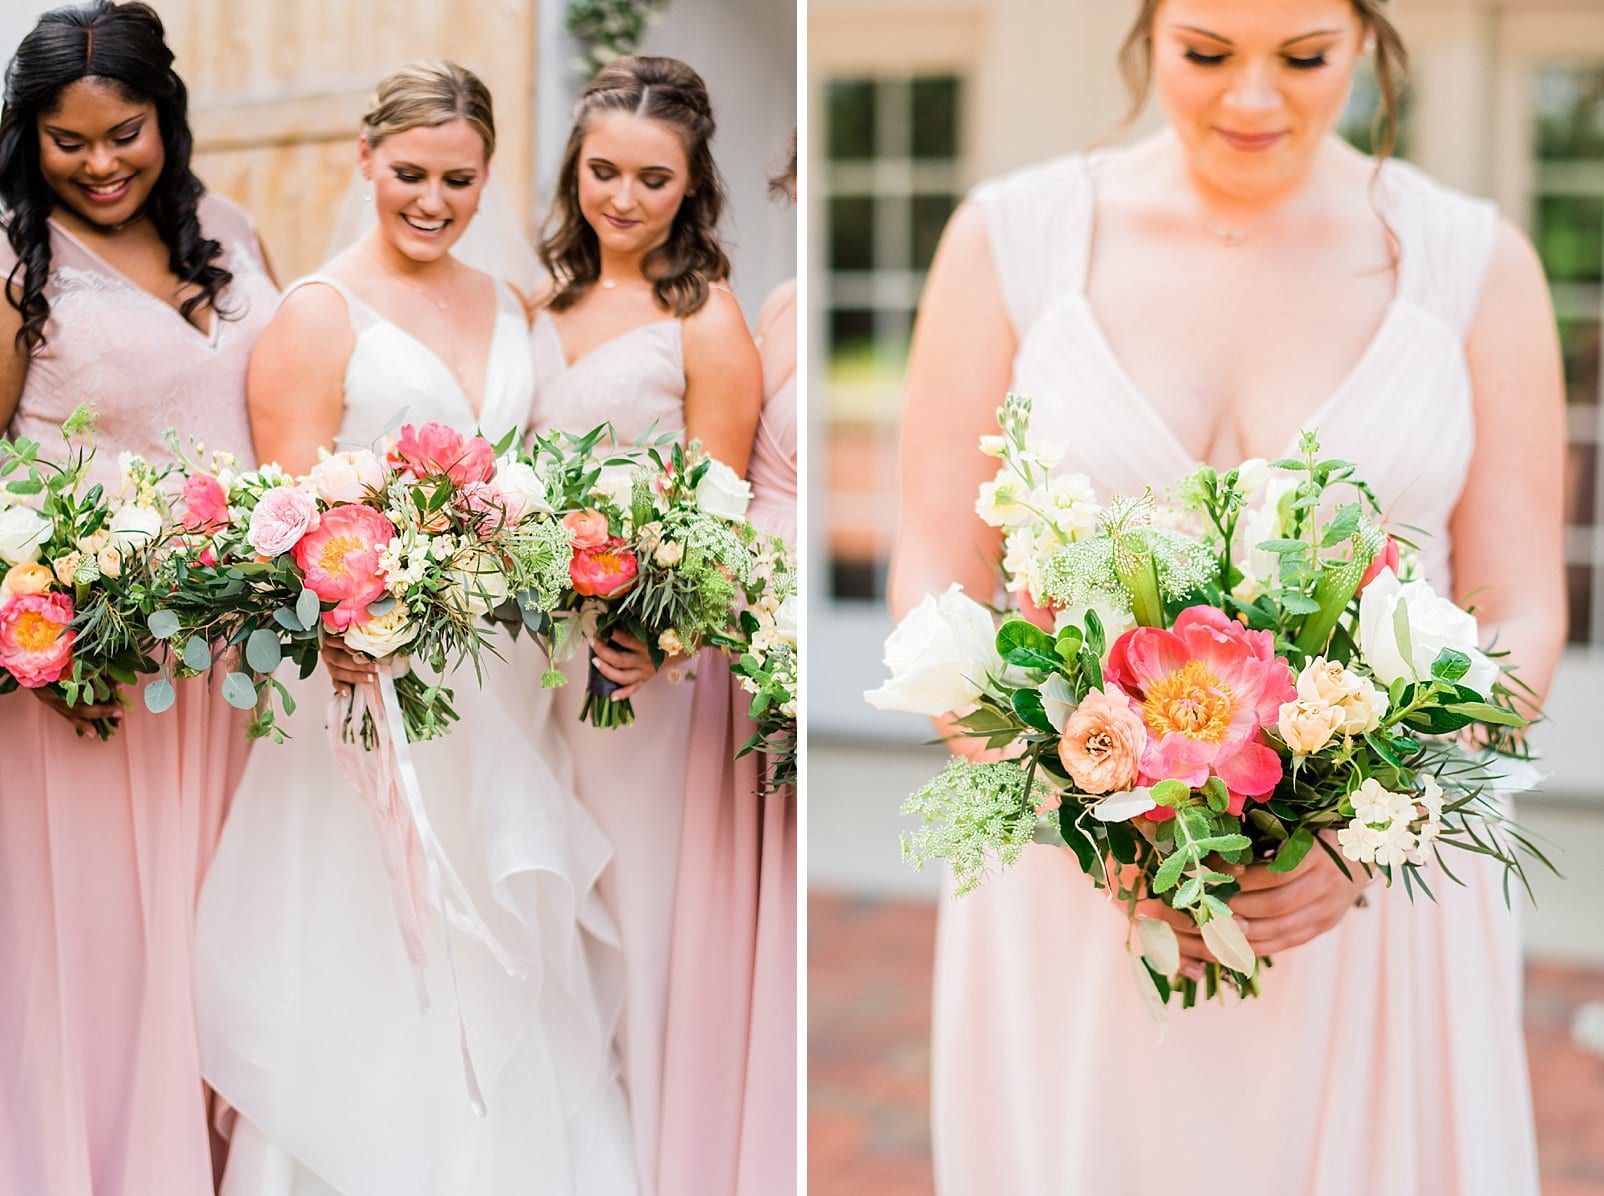 Wild Flora Farm bridesmaid bouquet with coral, peach and white flowers photo